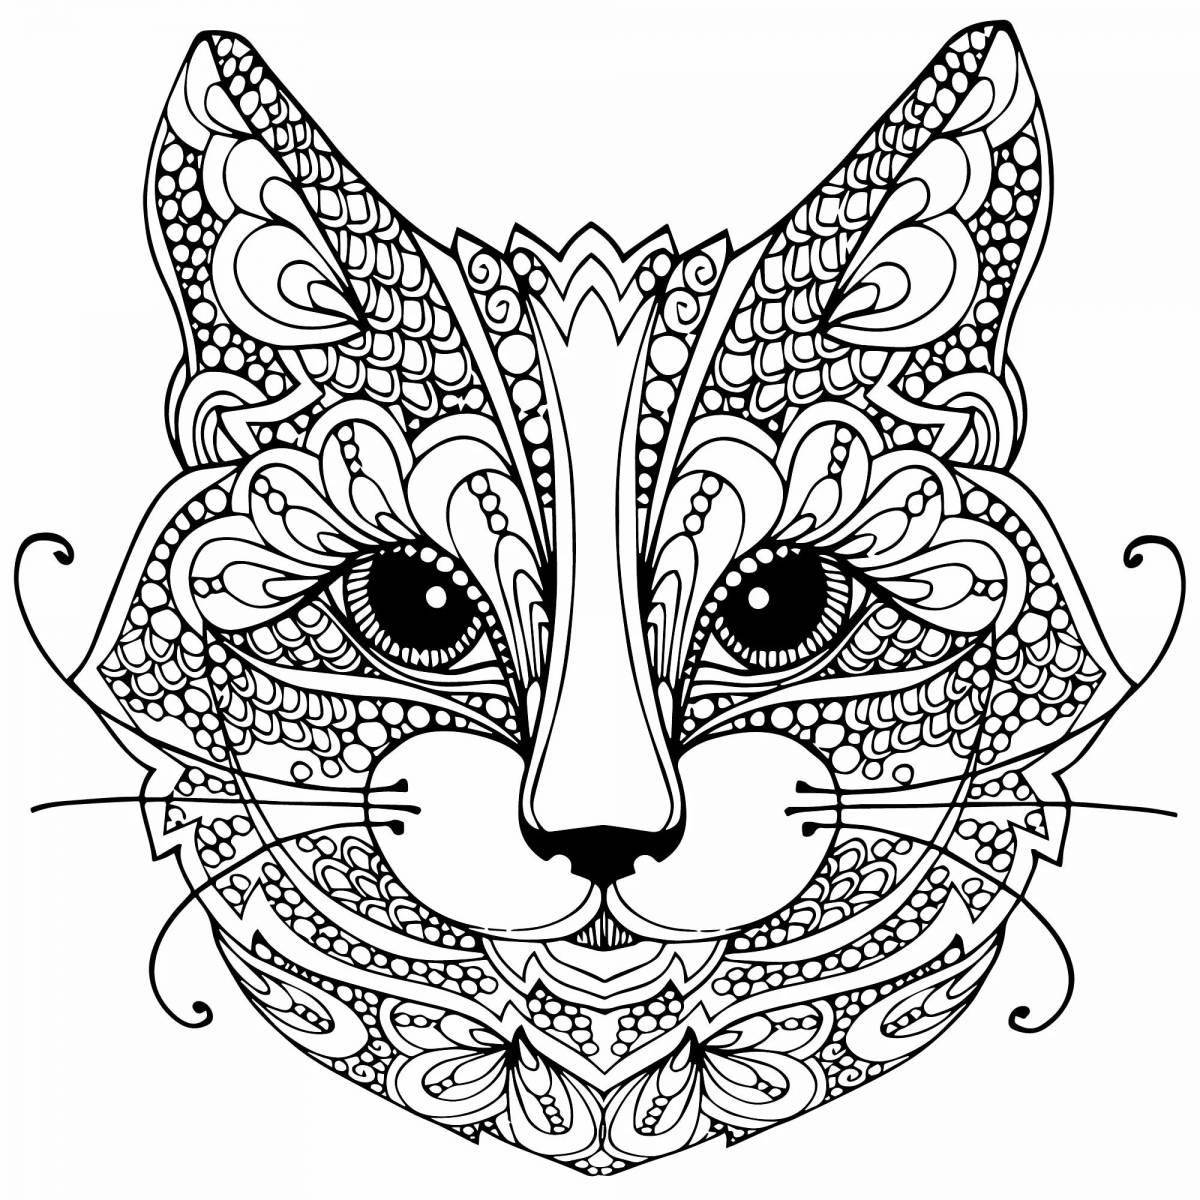 Adorable anti-stress coloring book for adults